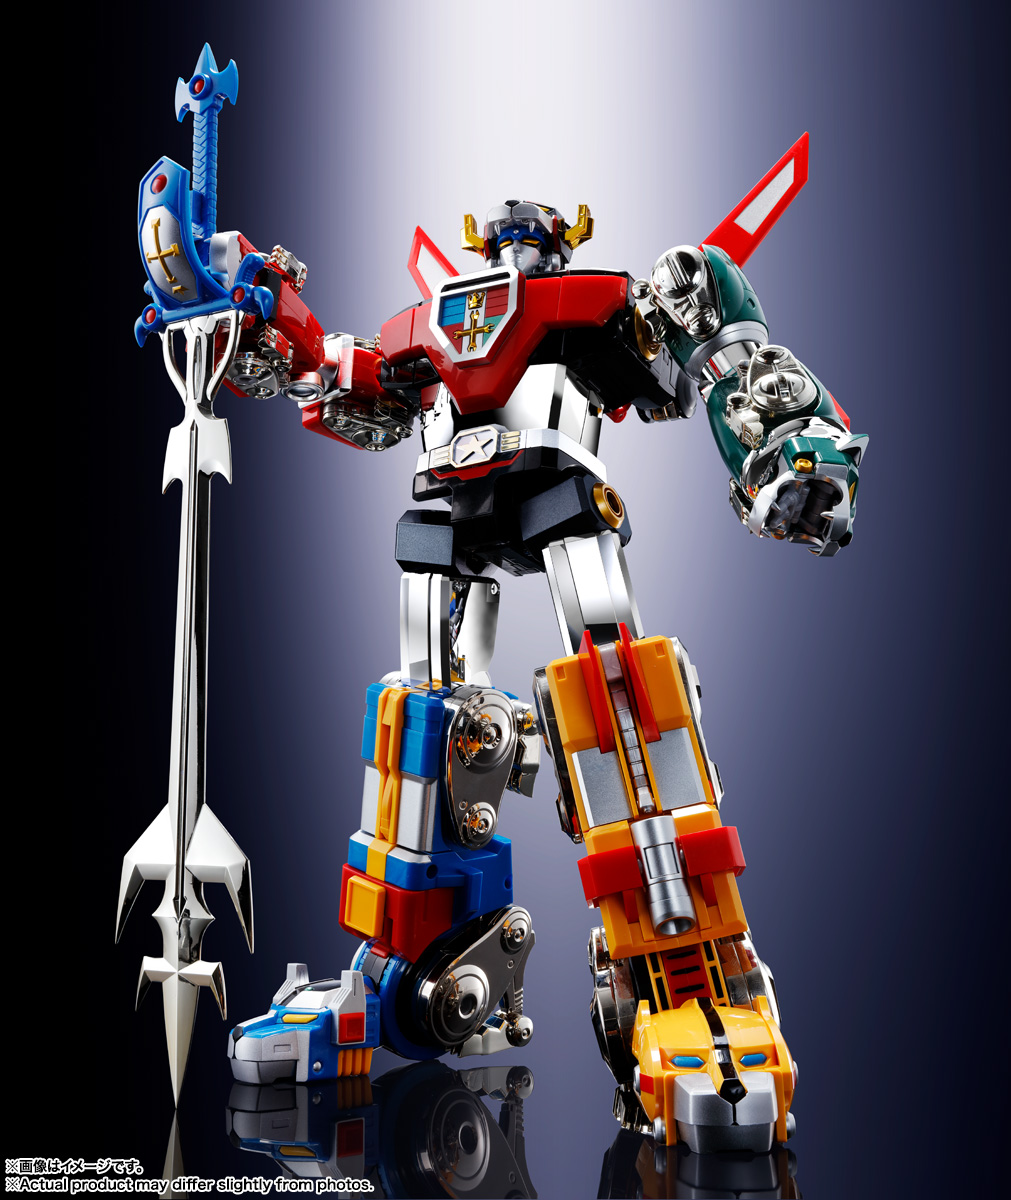 voltron-gx-71sp-voltron-chogokin-action-figure-50th-anniversary-ver image count 7